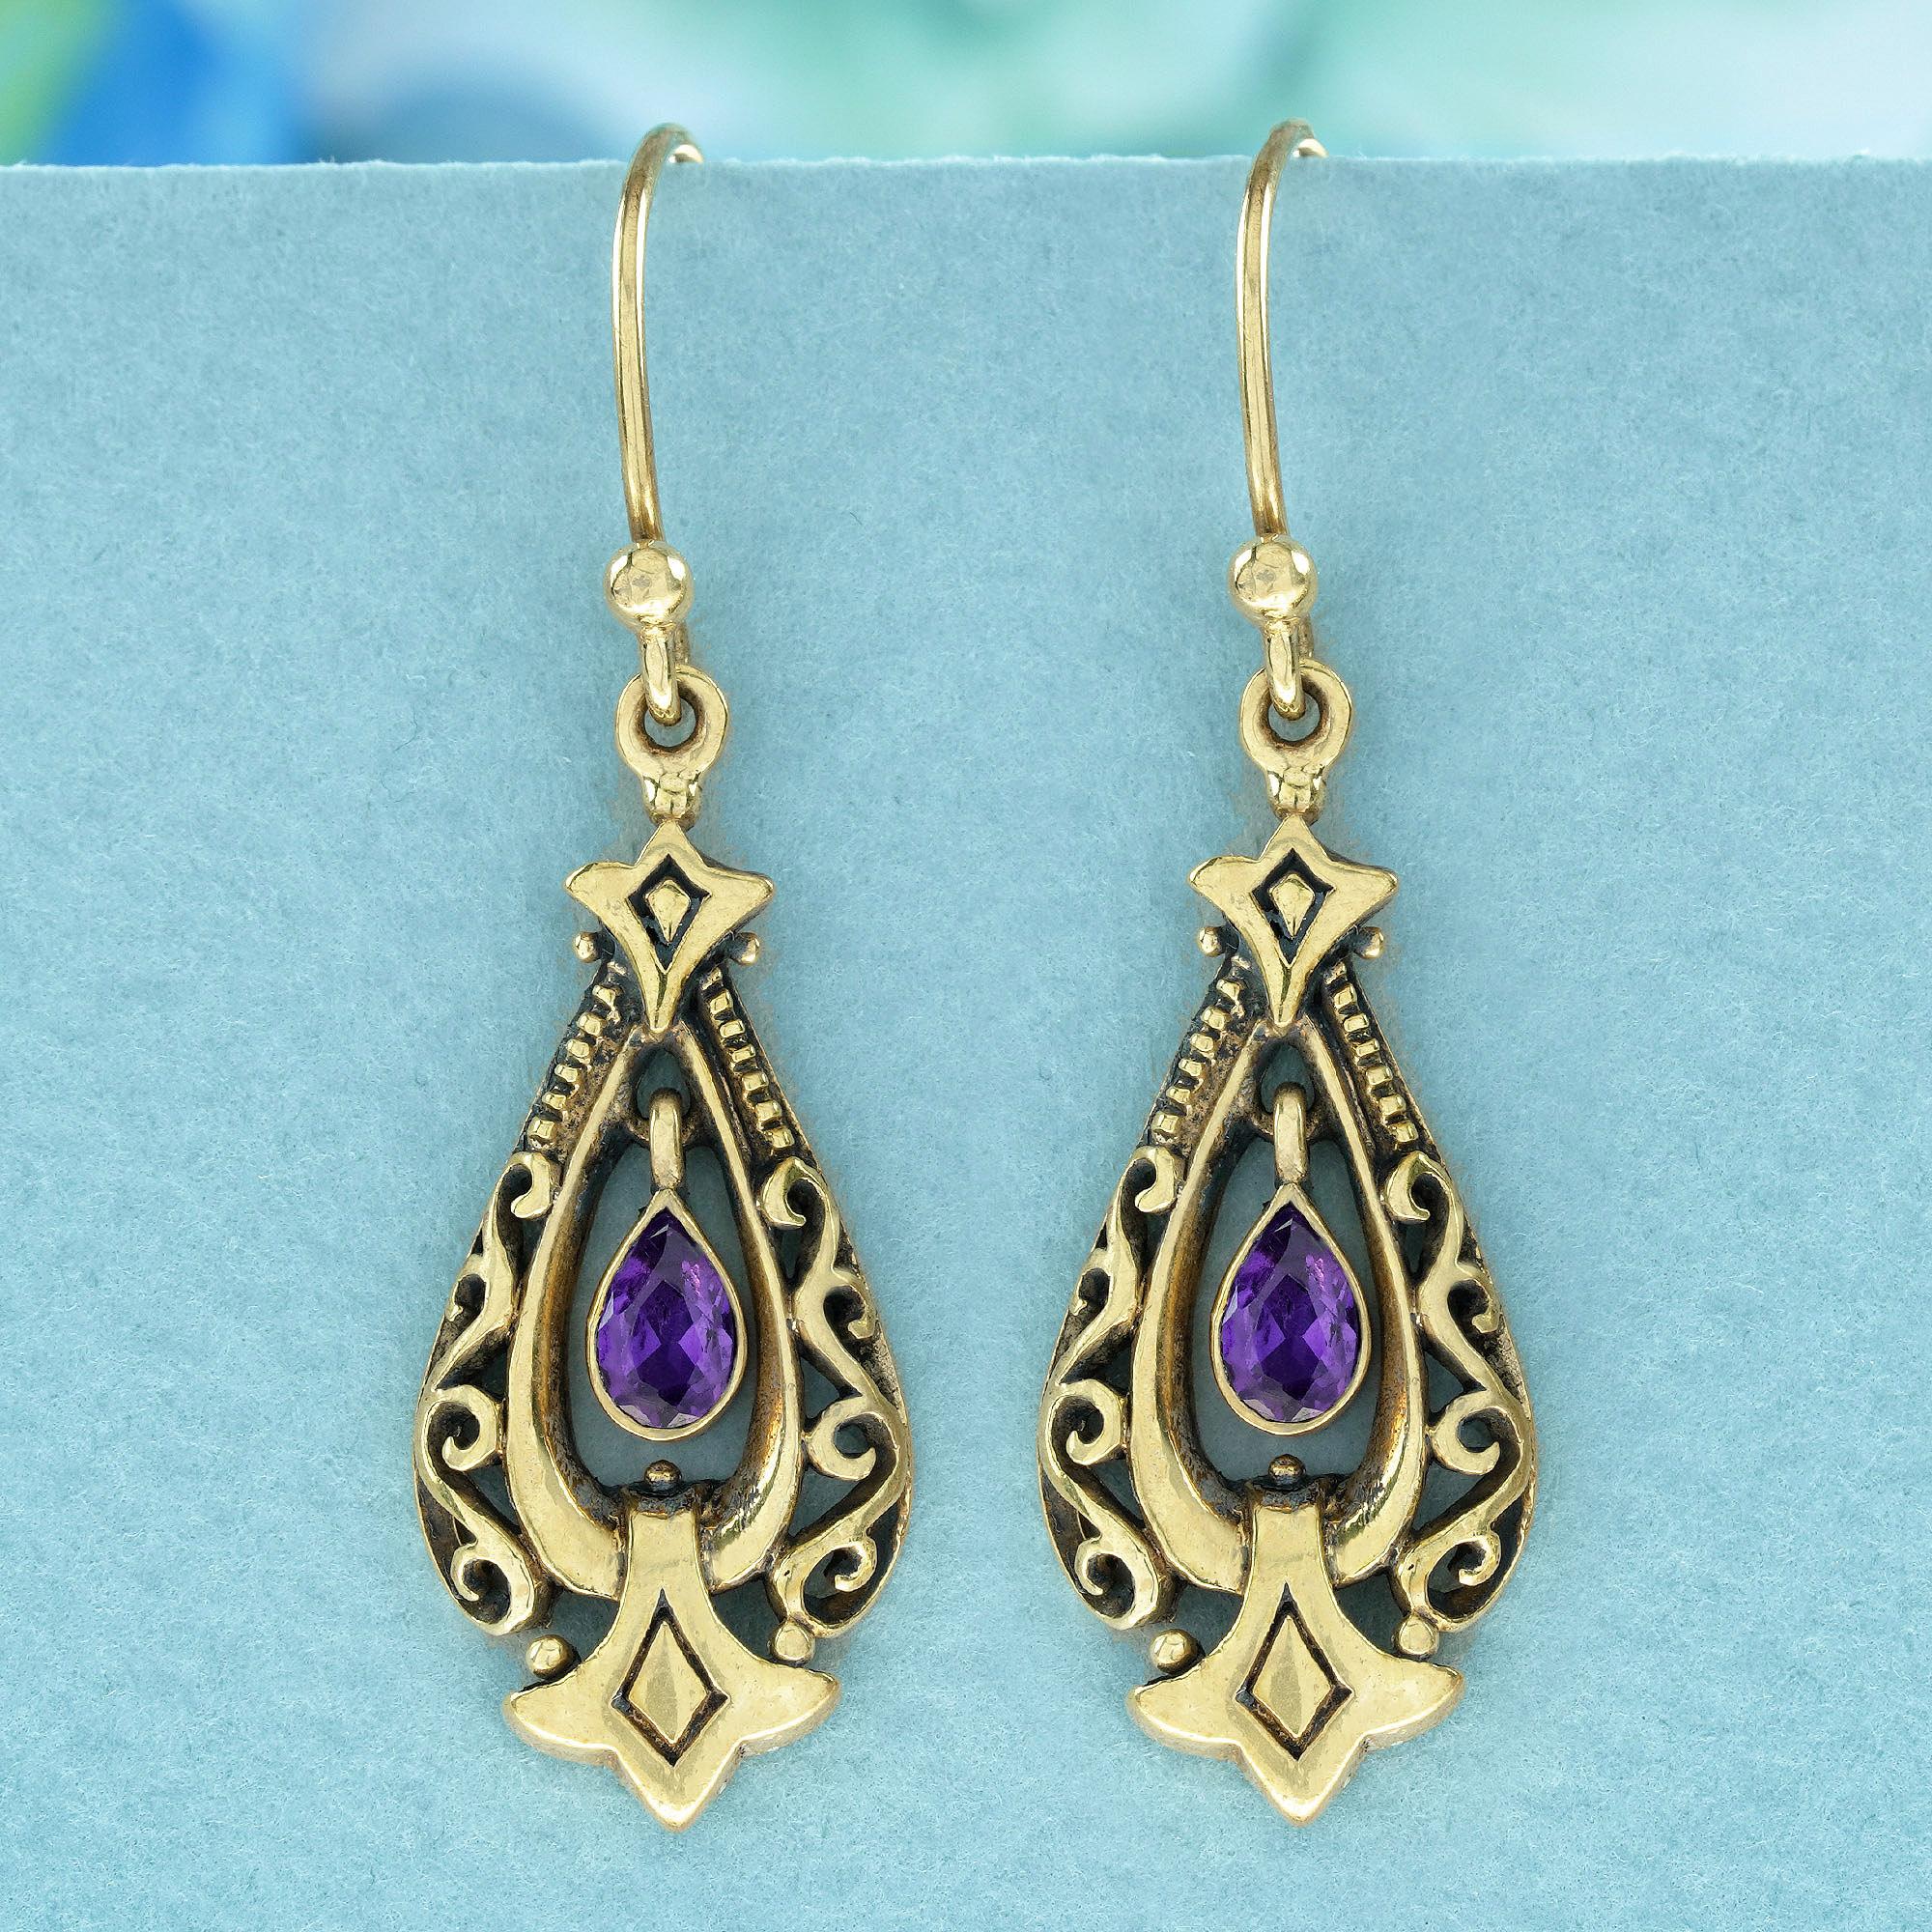 Crafted in vintage-style drop design, these yellow gold earrings feature a purple drop shaped amethyst at the center surrounded by delicate yellow gold scrollwork. The dangle design is completed with a hook closure at the top, adding a touch of